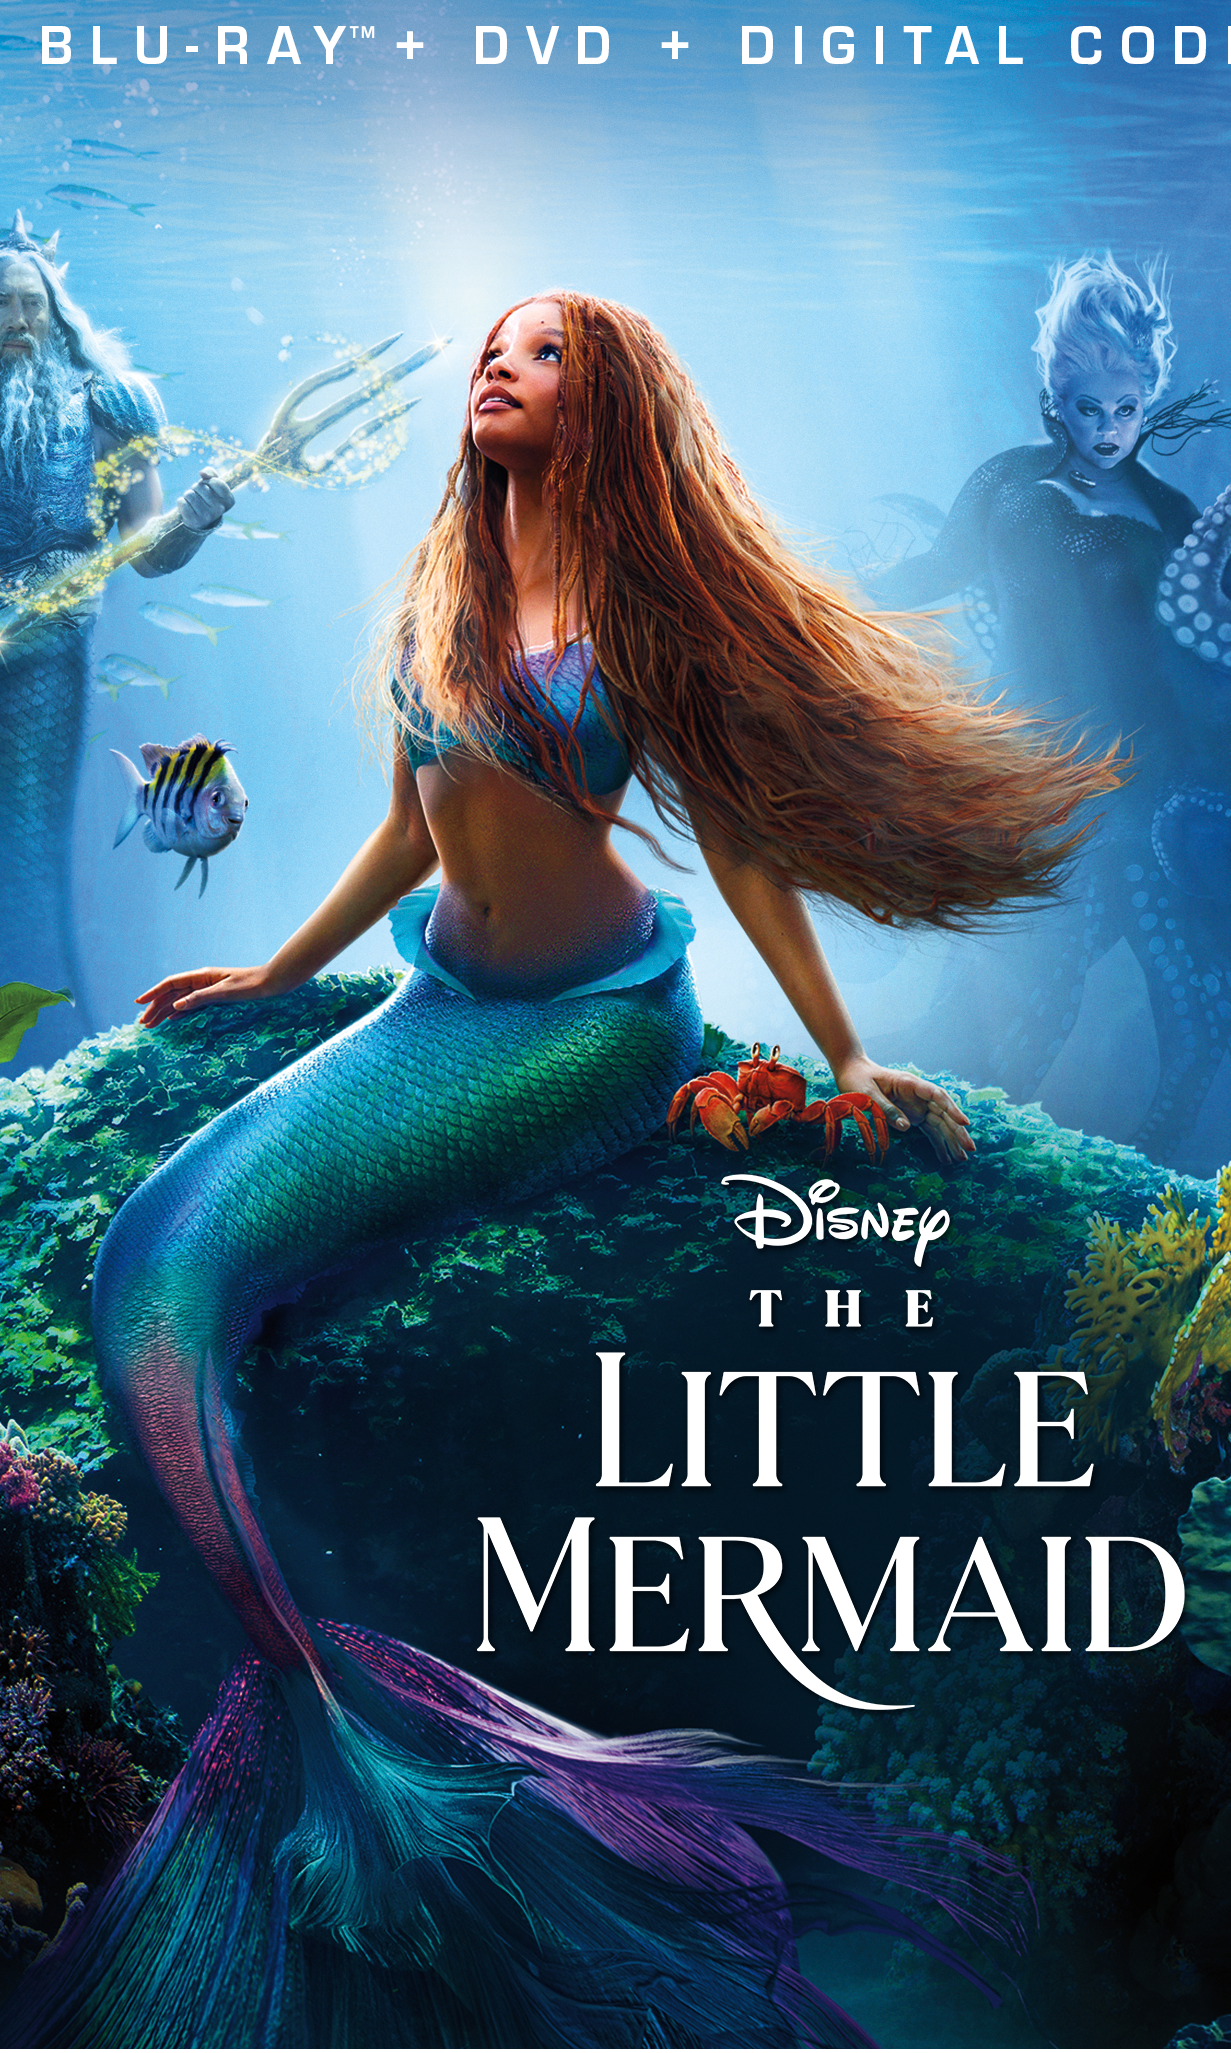 The Little Mermaid on Blu Ray and DVD